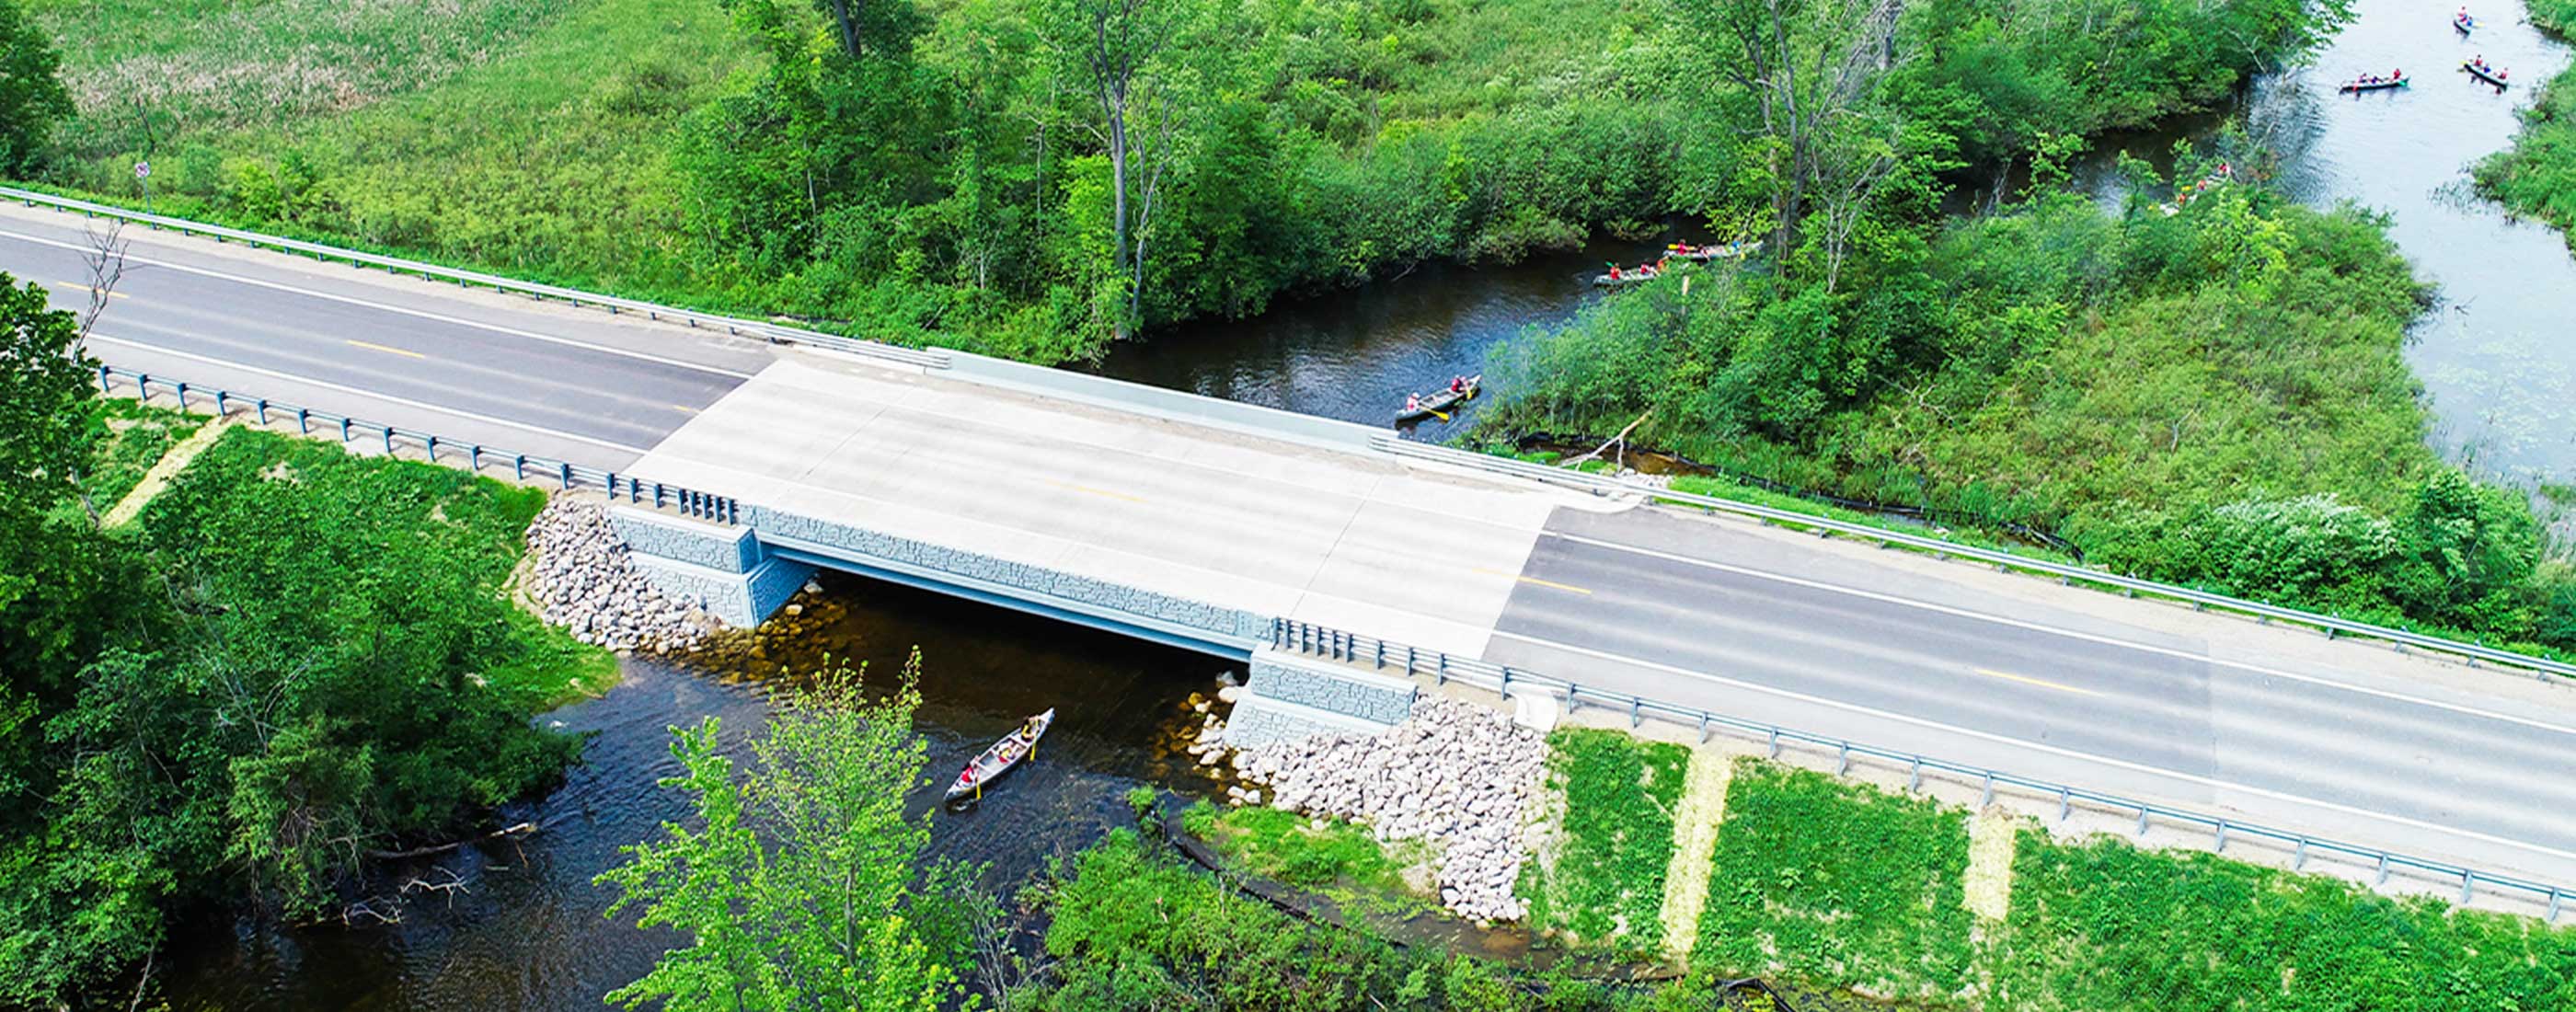 The Wixom Road bridge replacement accommodates park-going canoe and kayak traffic traveling.